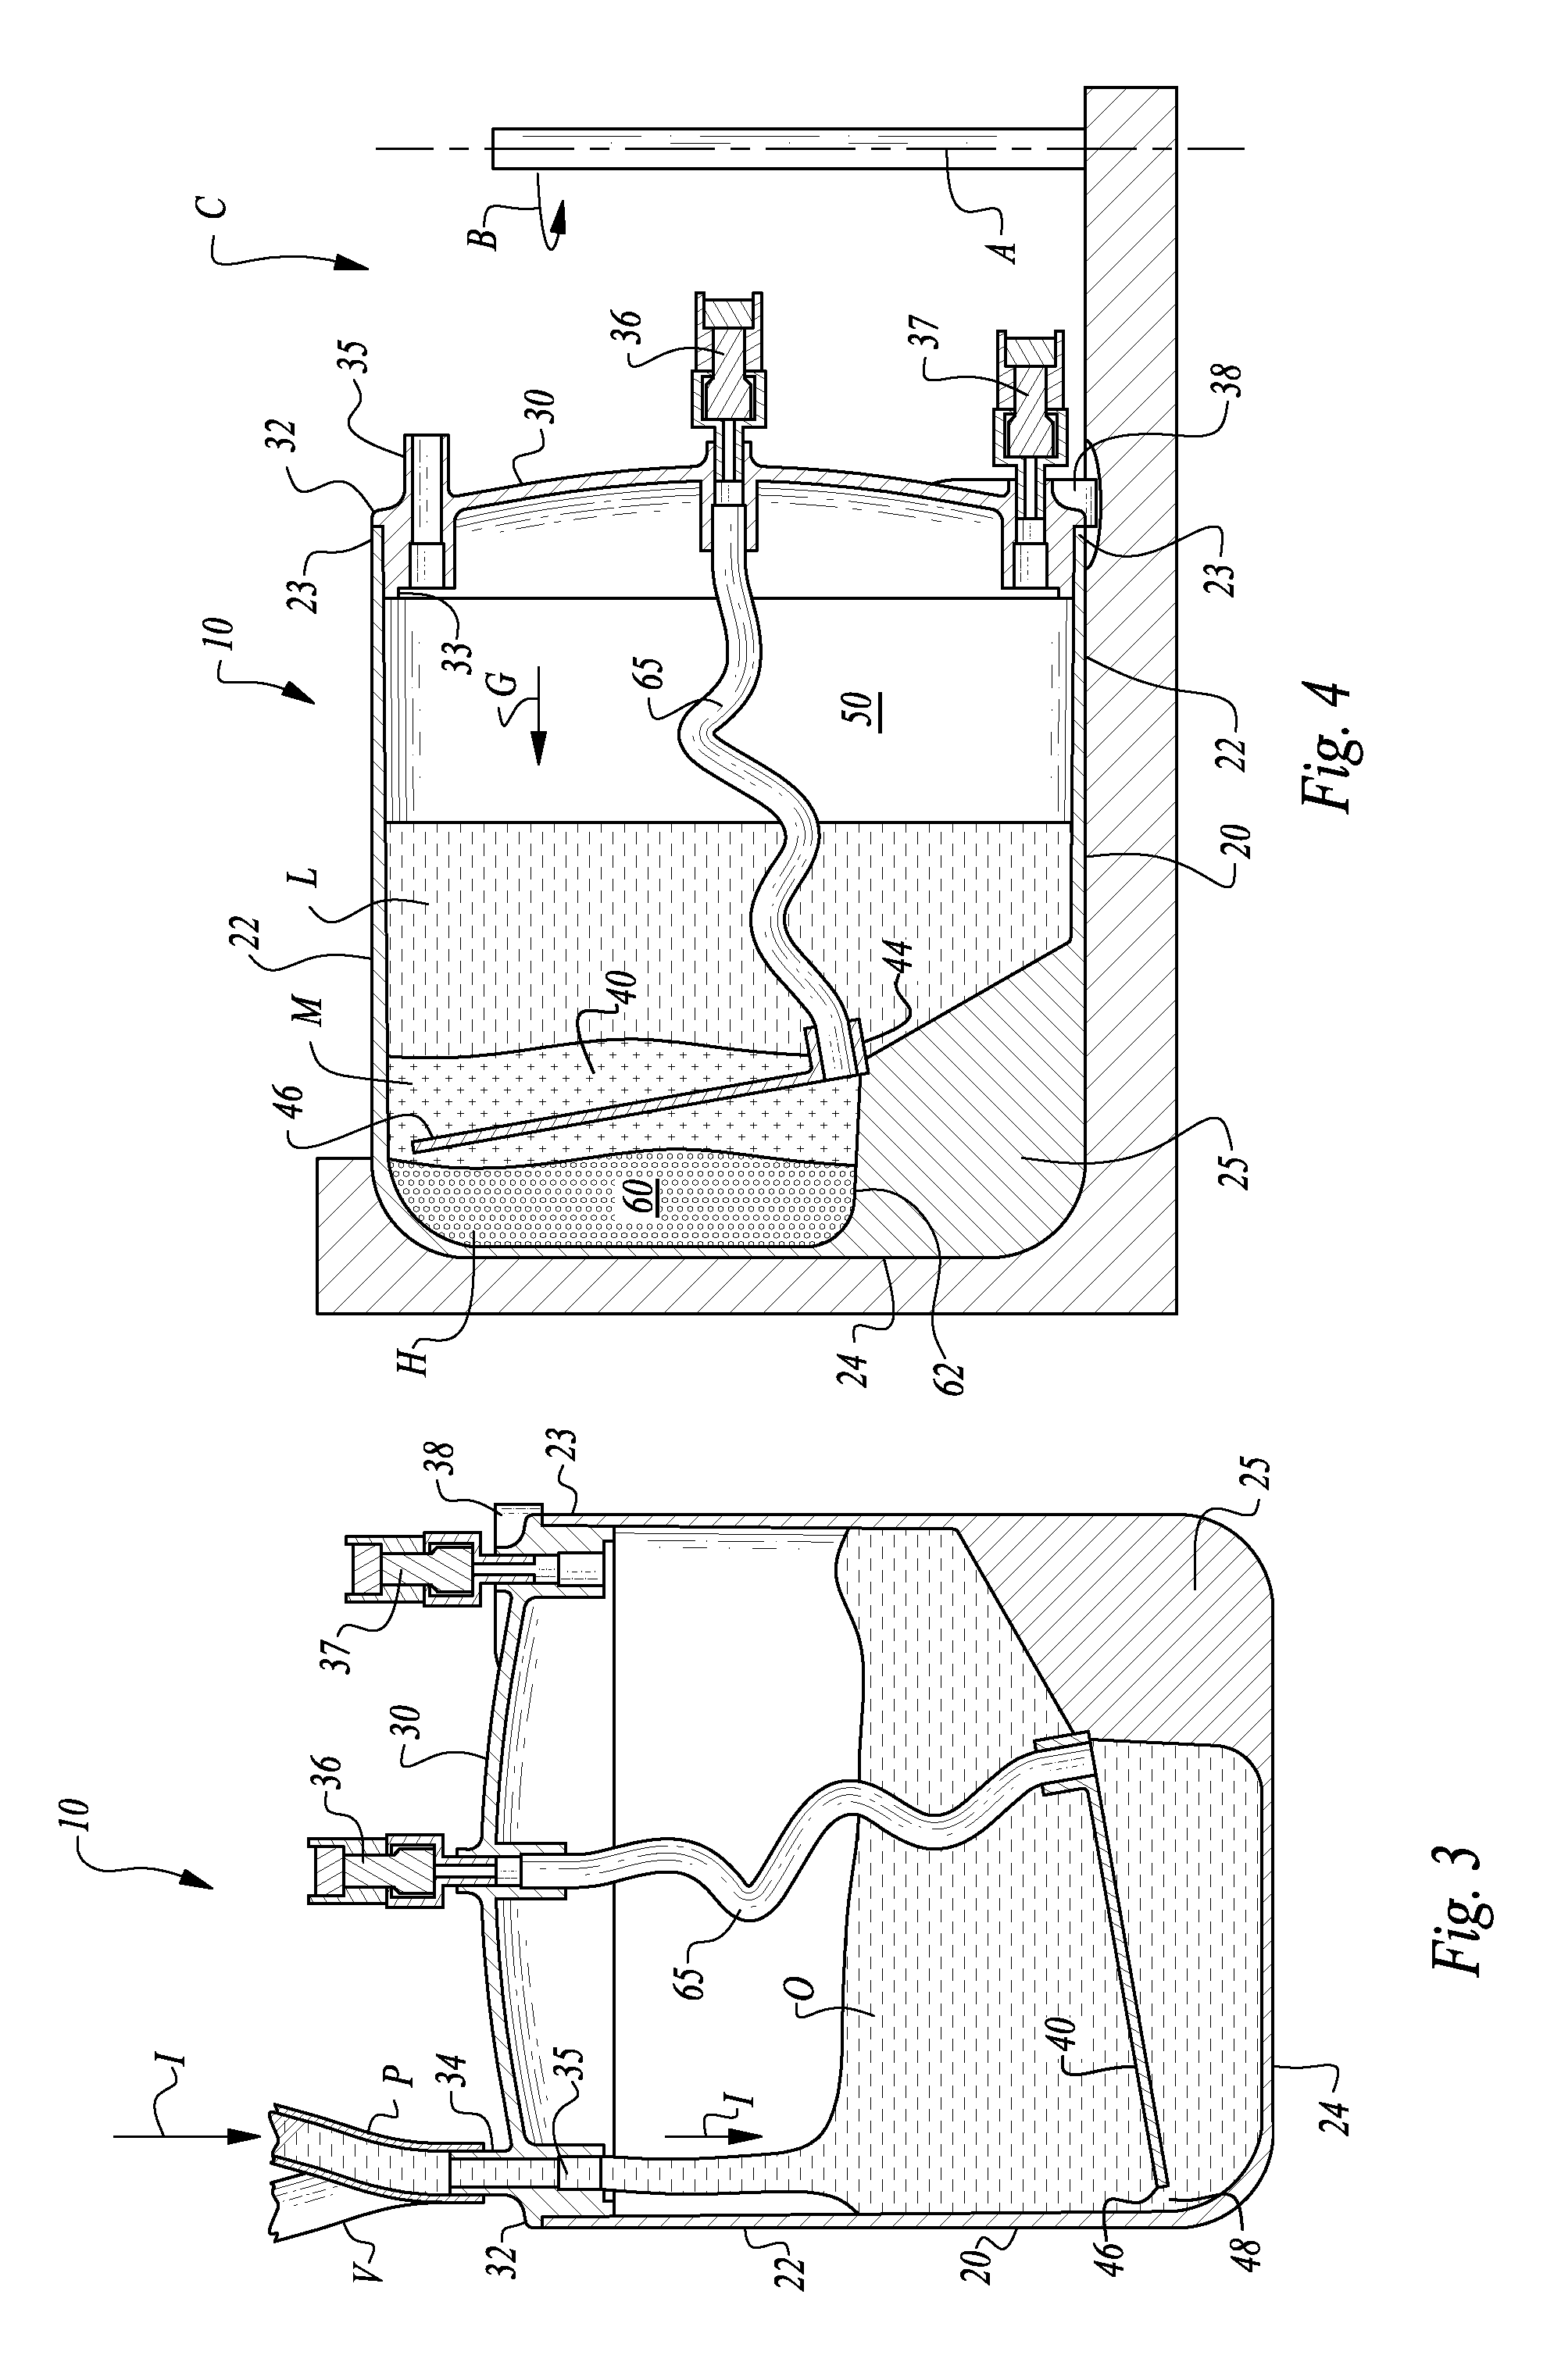 Apparatus for centrifugation and methods therefore